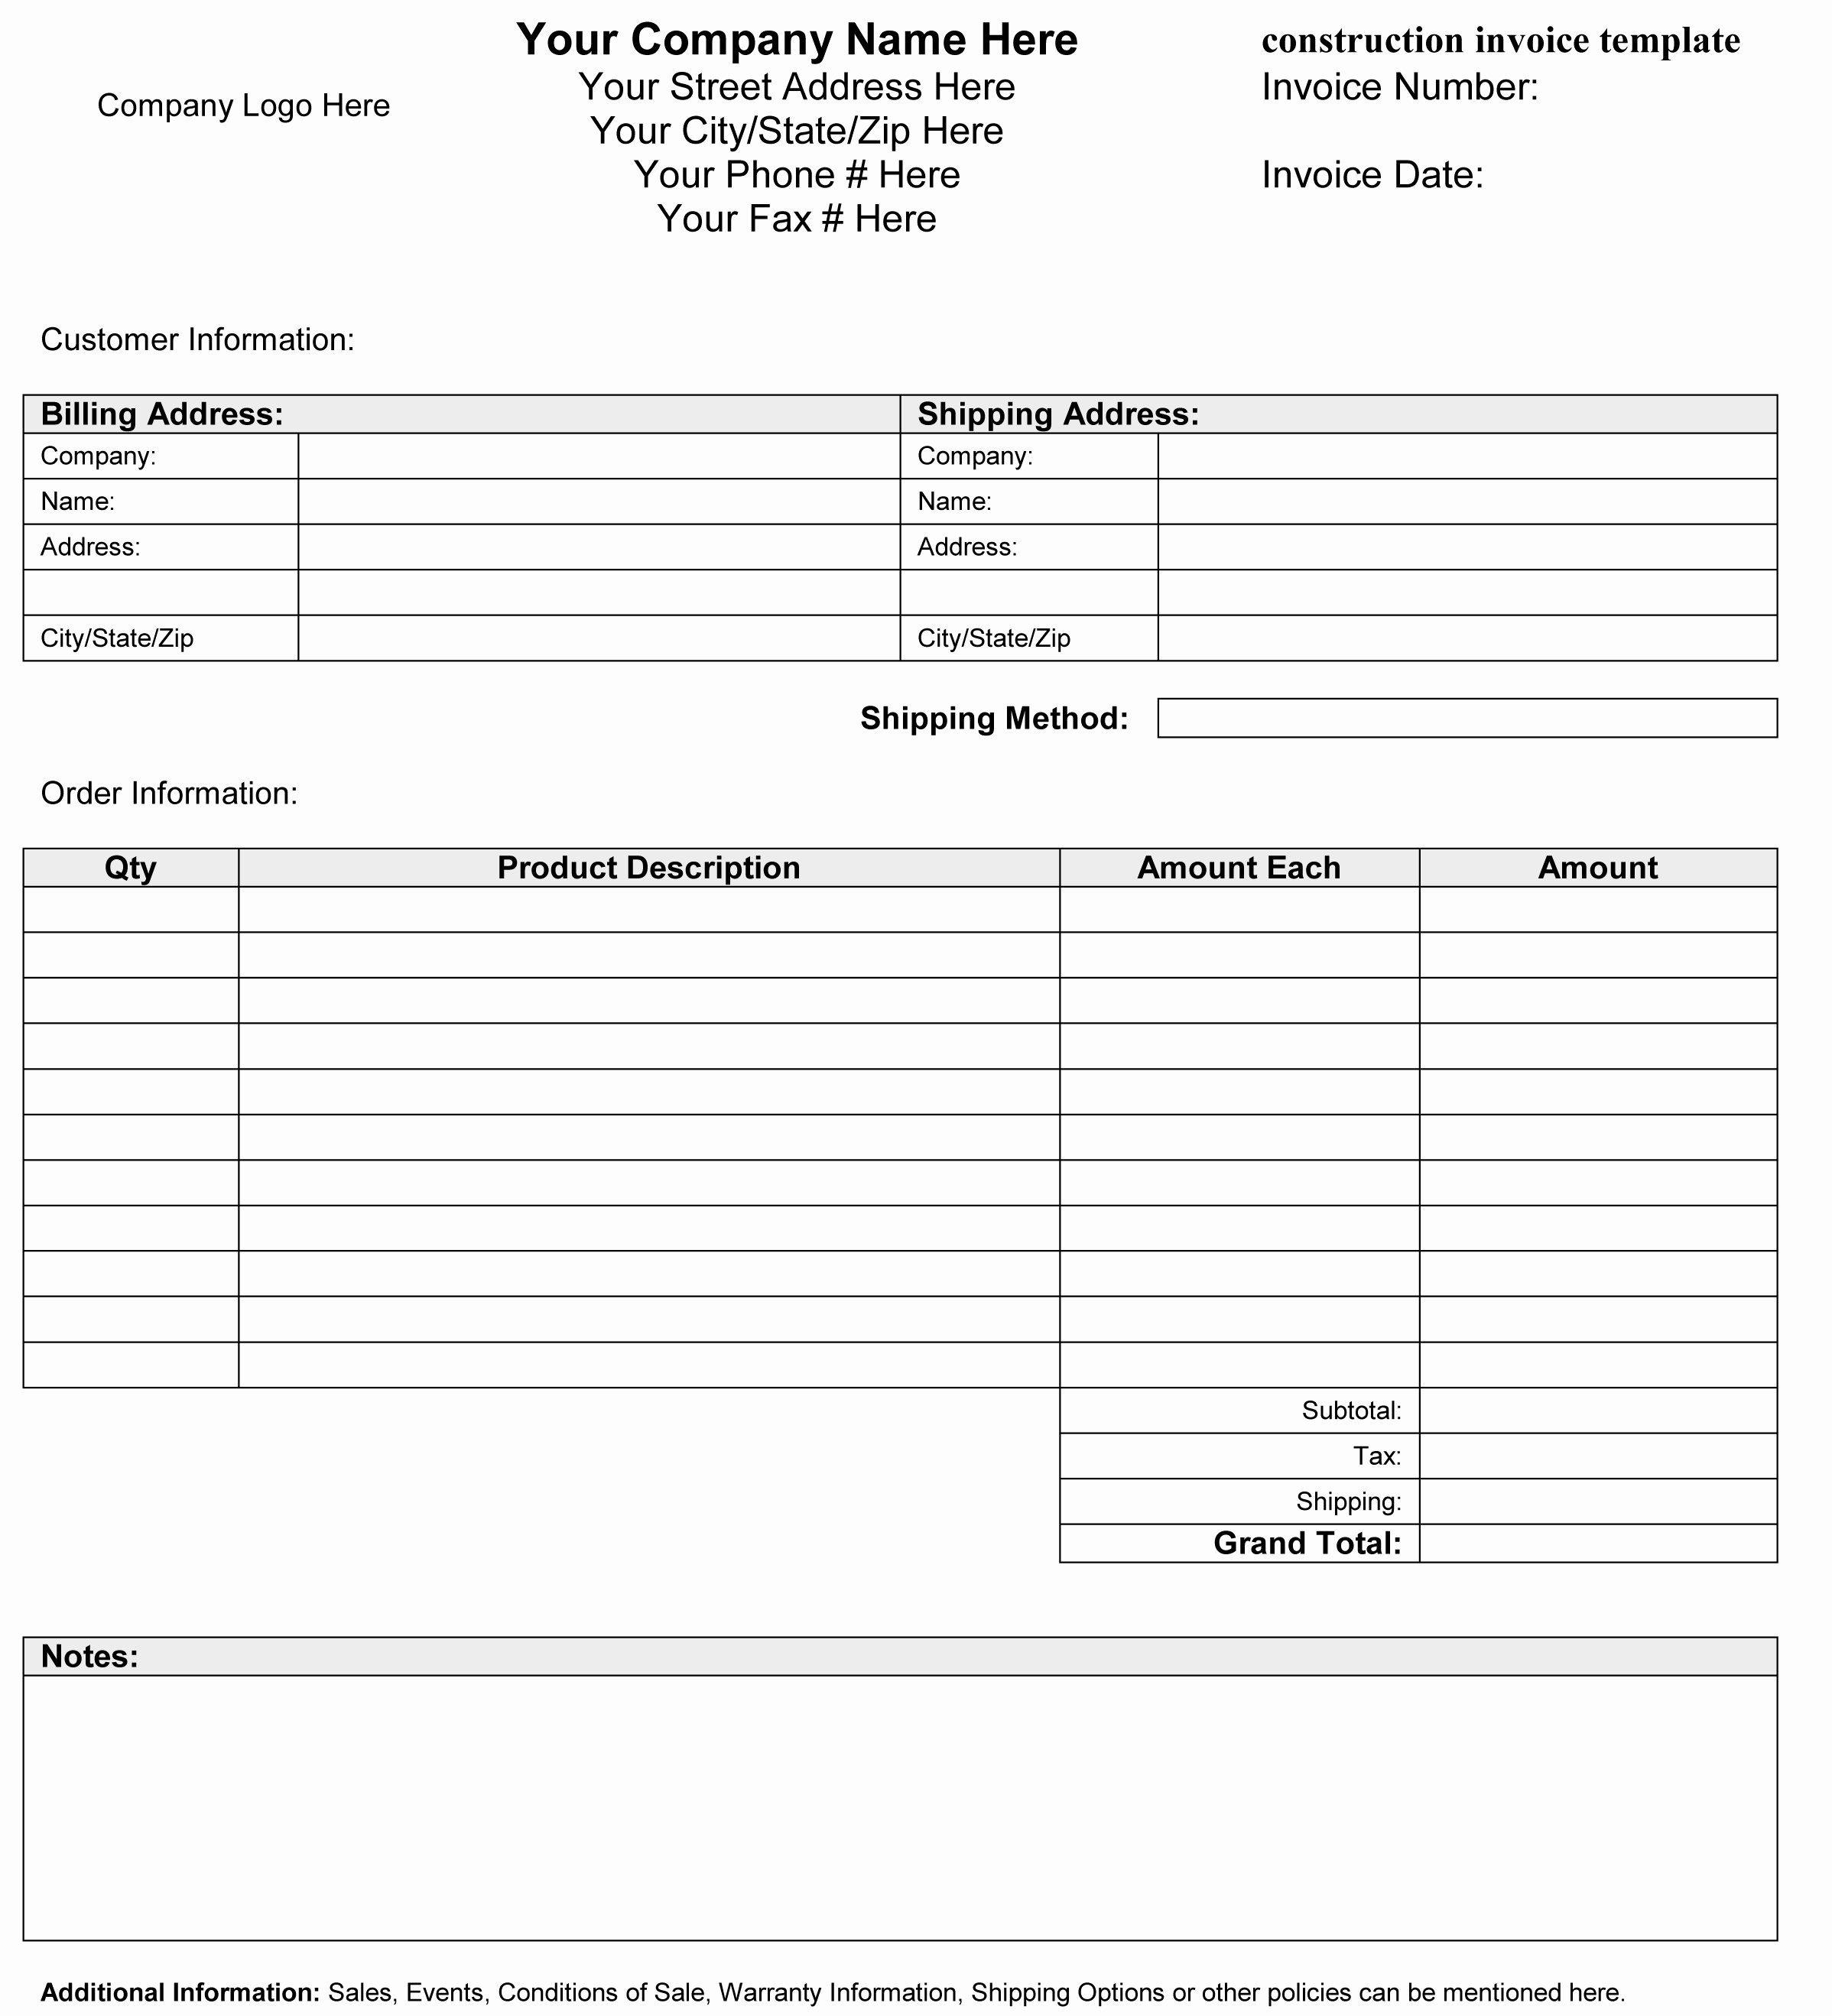 Free Contractor Invoice Template New Construction Invoice Template